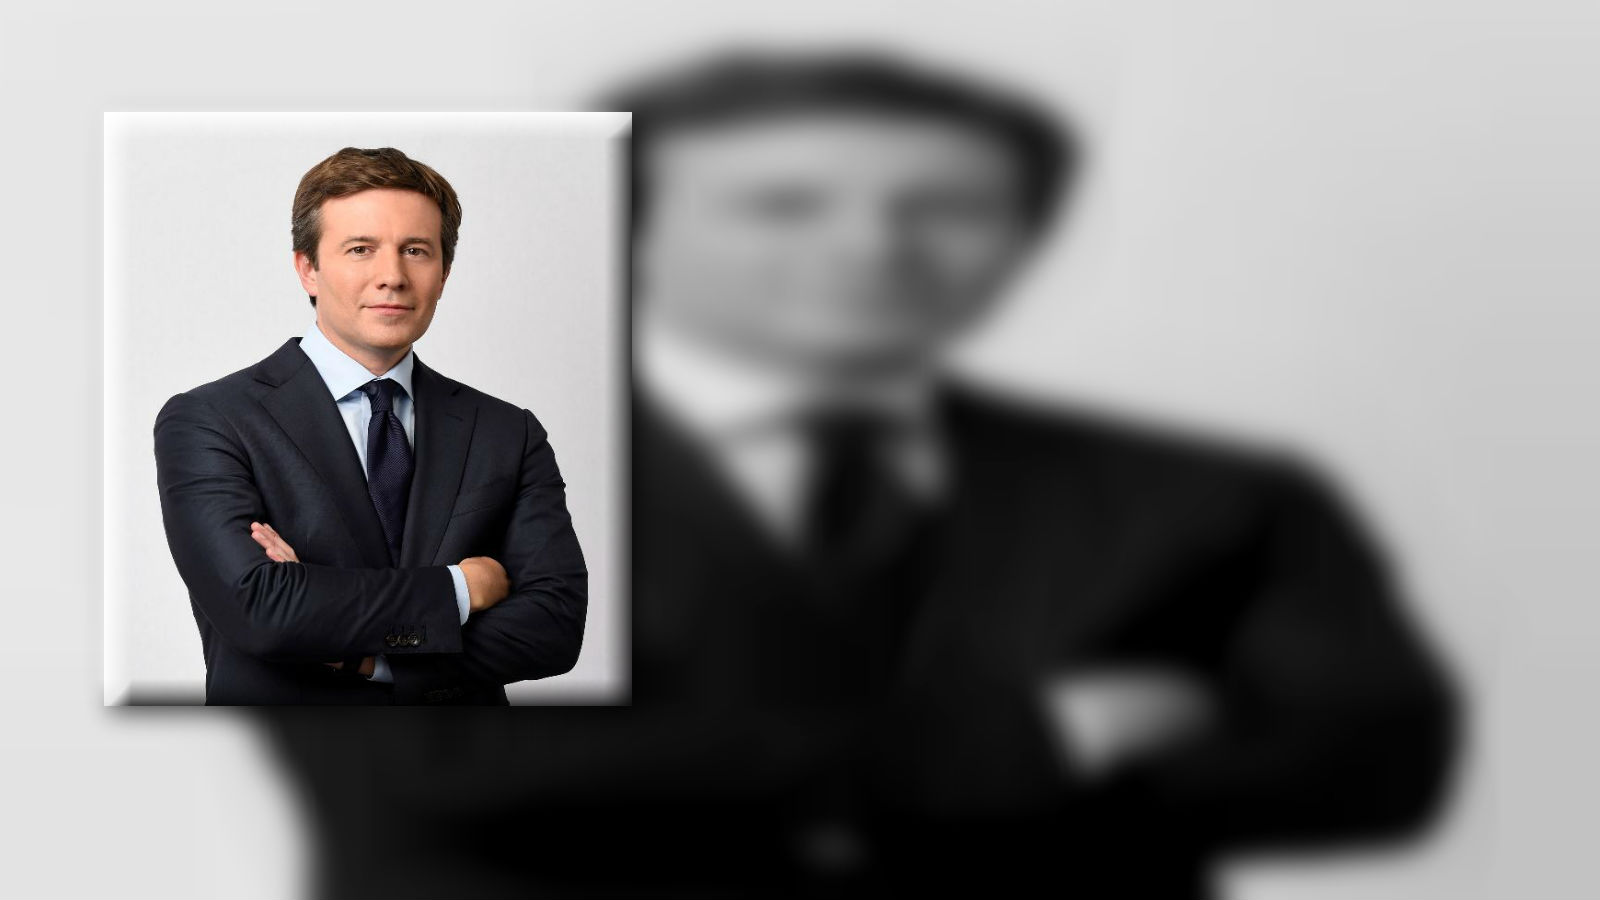 The Cbs Evening News With Jeff Glor To Launch By Year S End